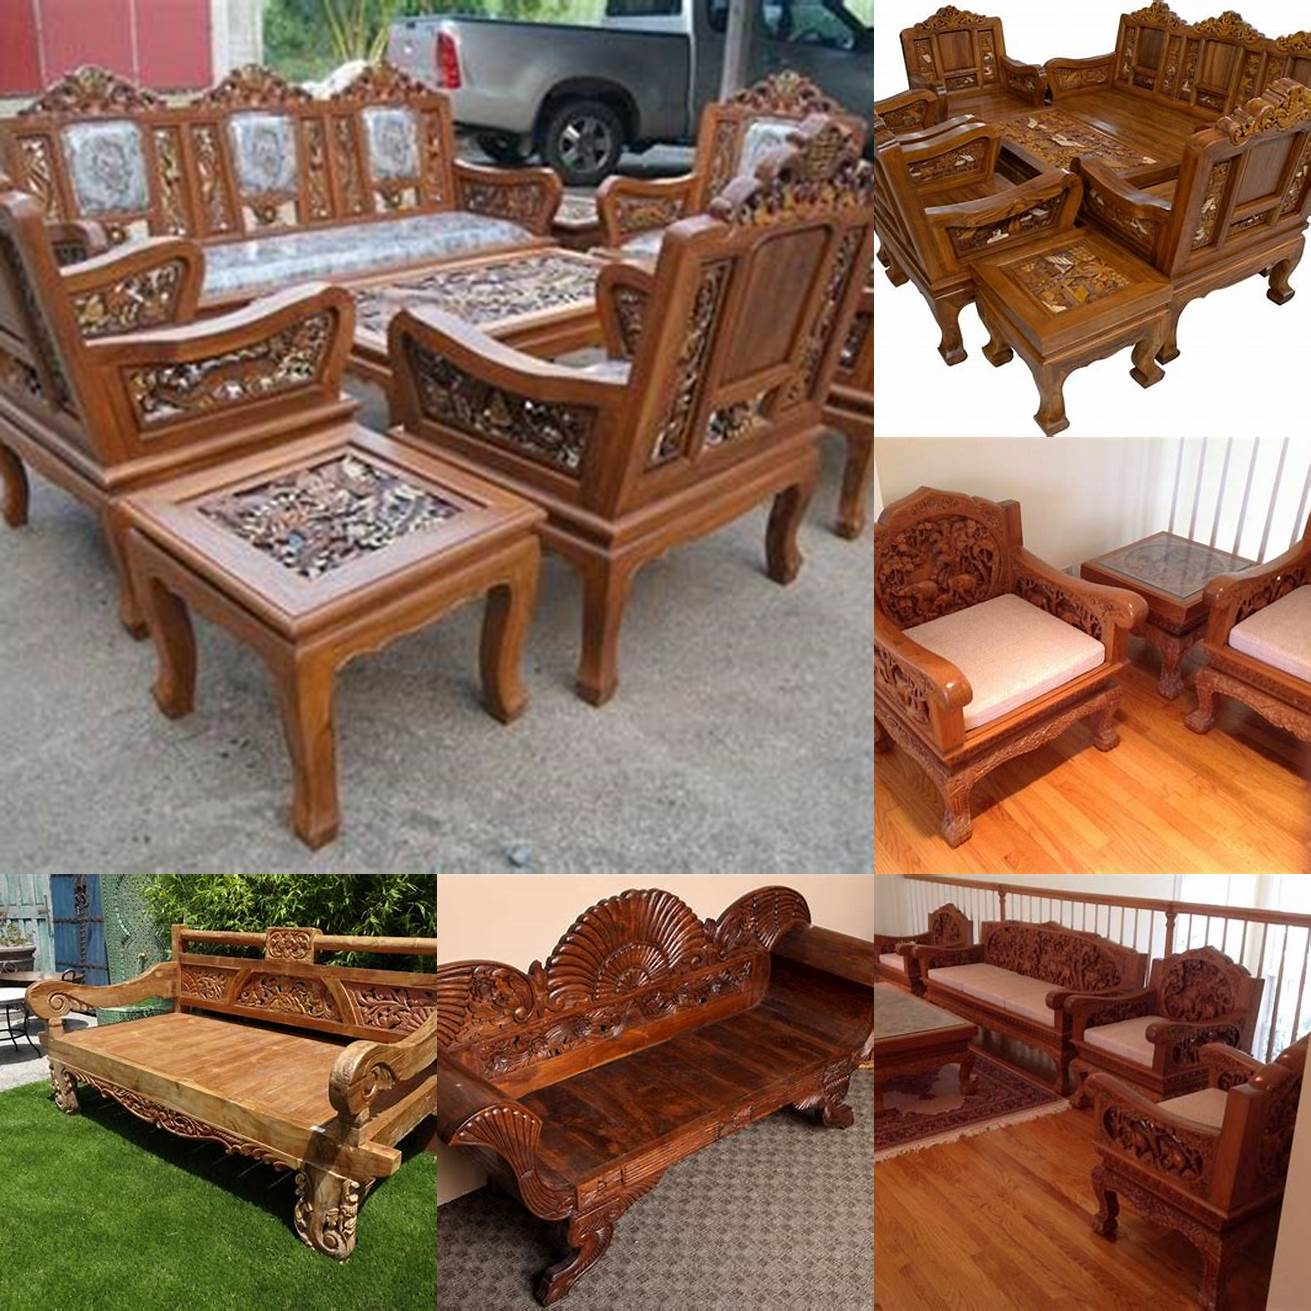 Teak furniture with different carvings